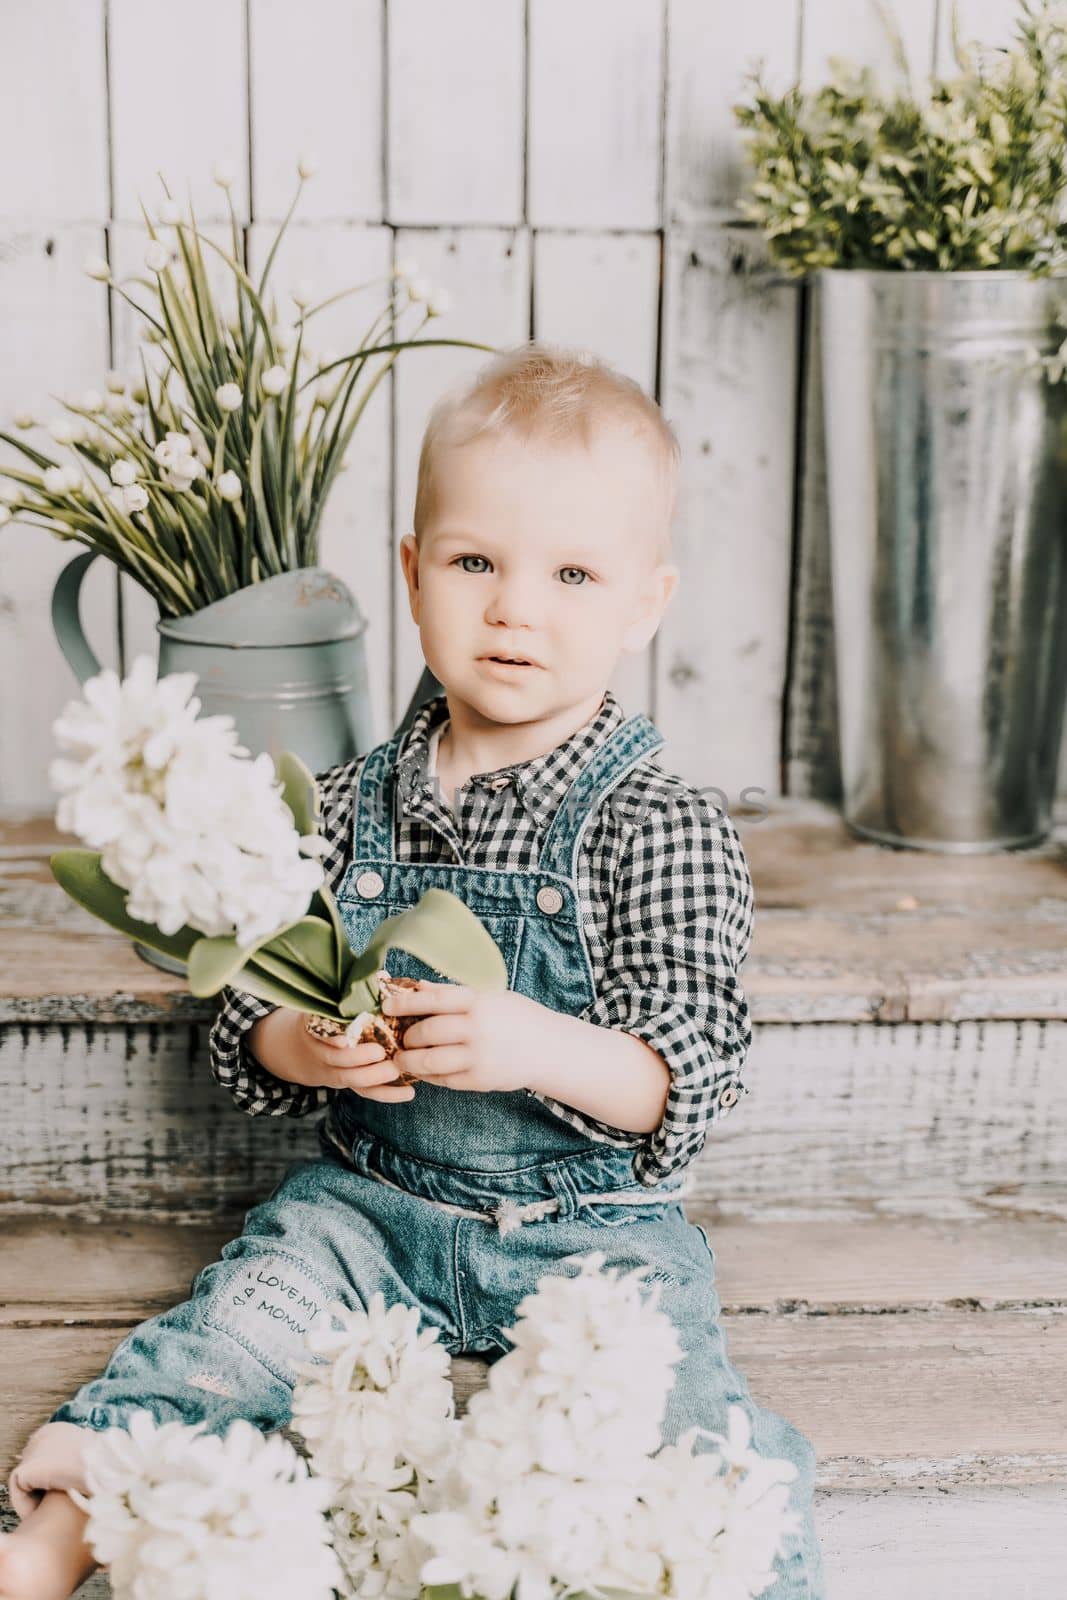 Girl 1 year old. sits holding a white hyacinth with a bulb in her hands, she is dressed in a plaid shirt and denim overalls on a wooden background with green plants in pots. by Matiunina